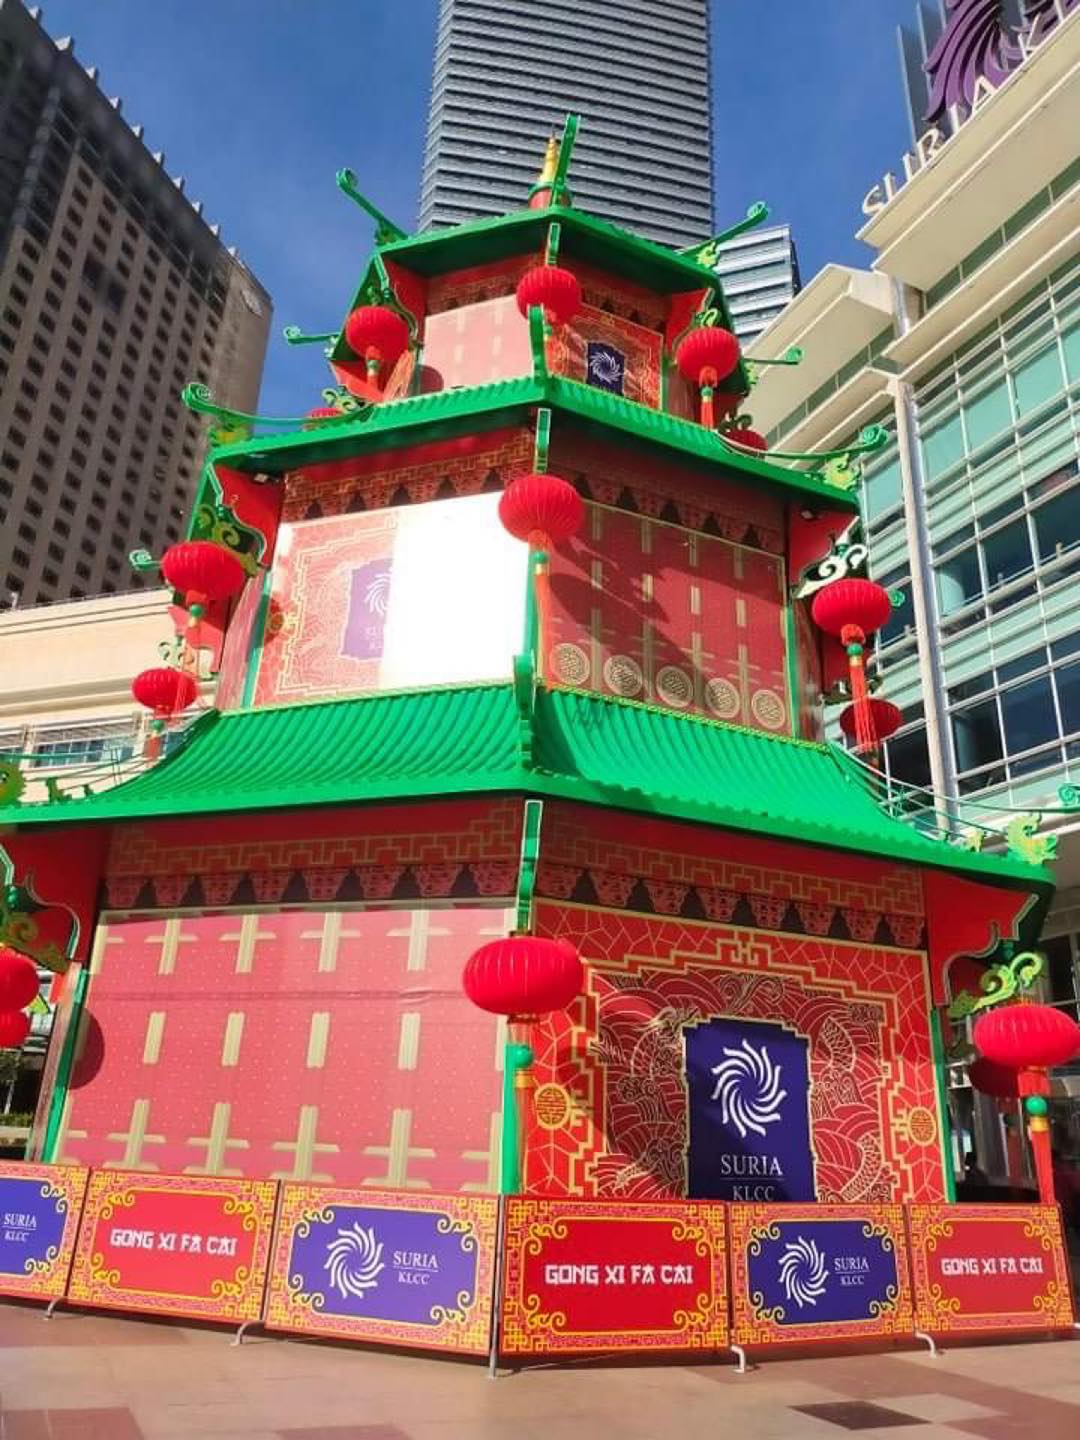 The CNY pagoda used by KLCC before its new coat of paint.